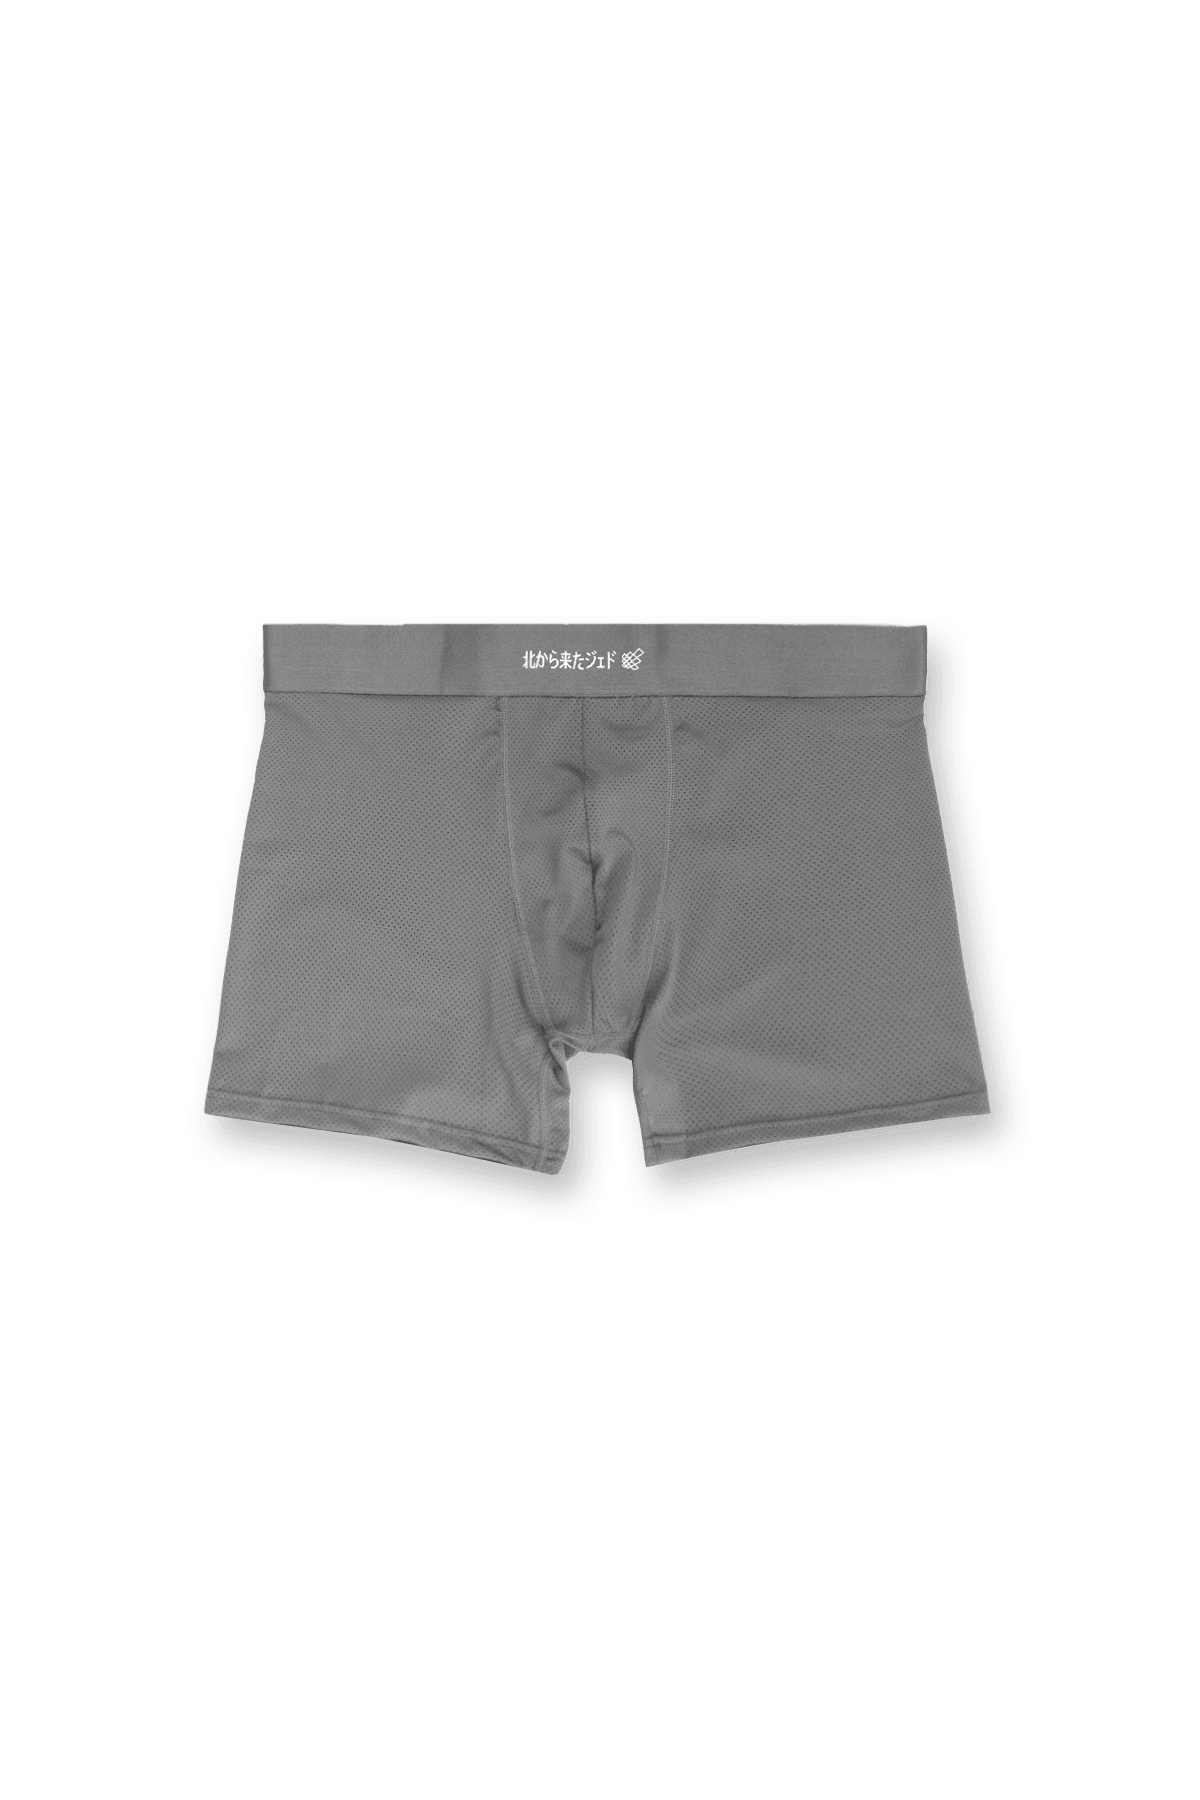 Men's Full Mesh Boxer Briefs 2 Pack - Black and Gray – Jed North